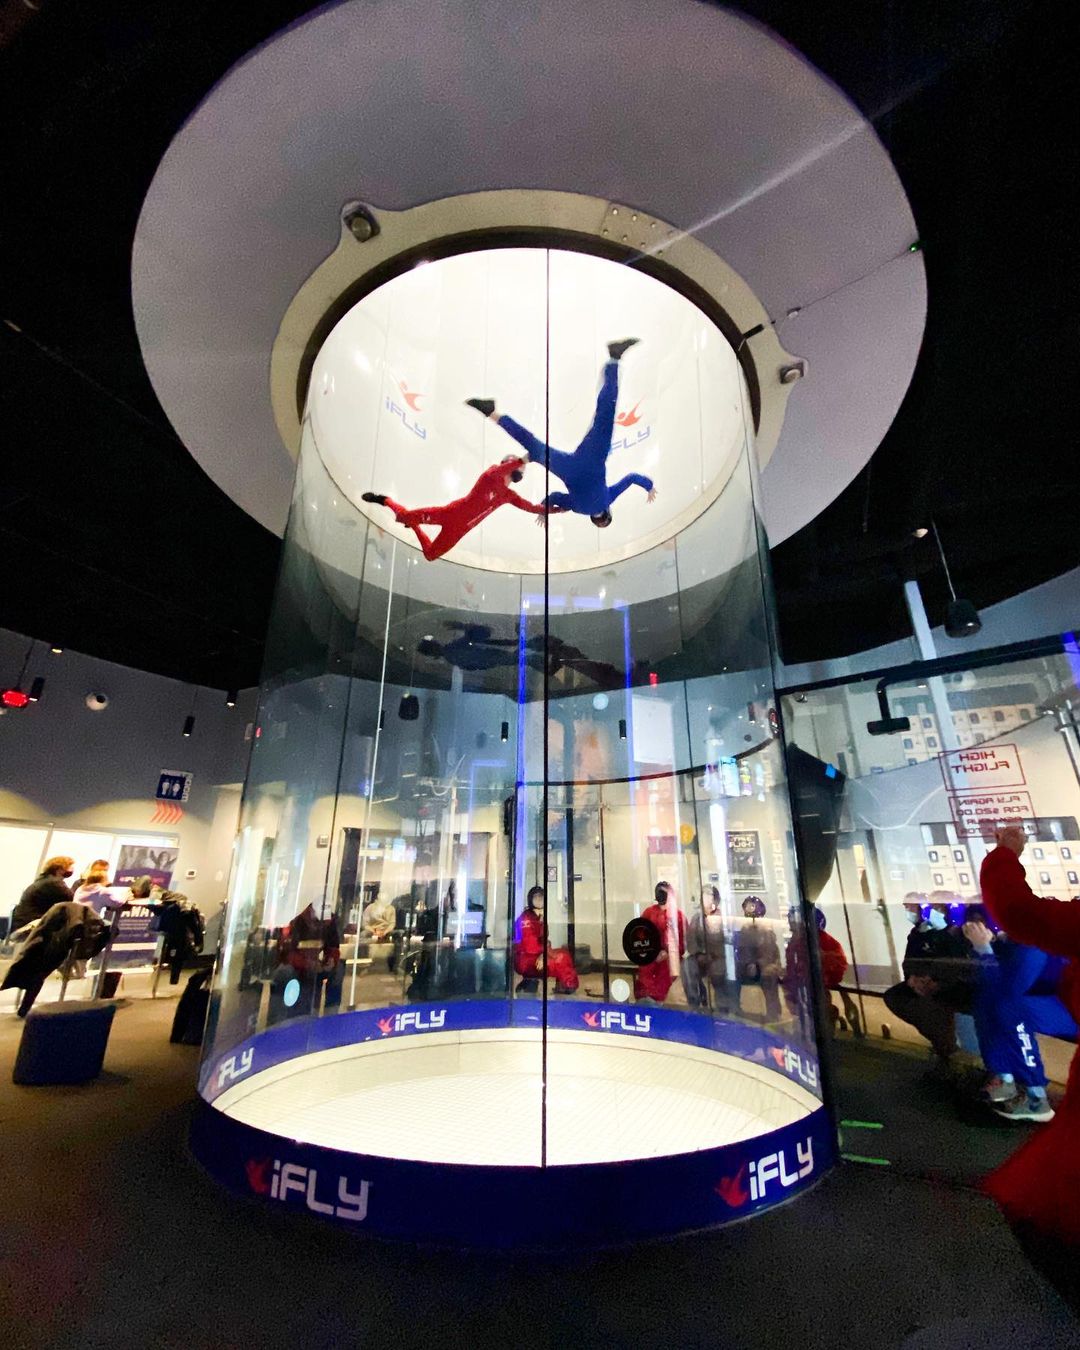 People in the iFLY wind tube.